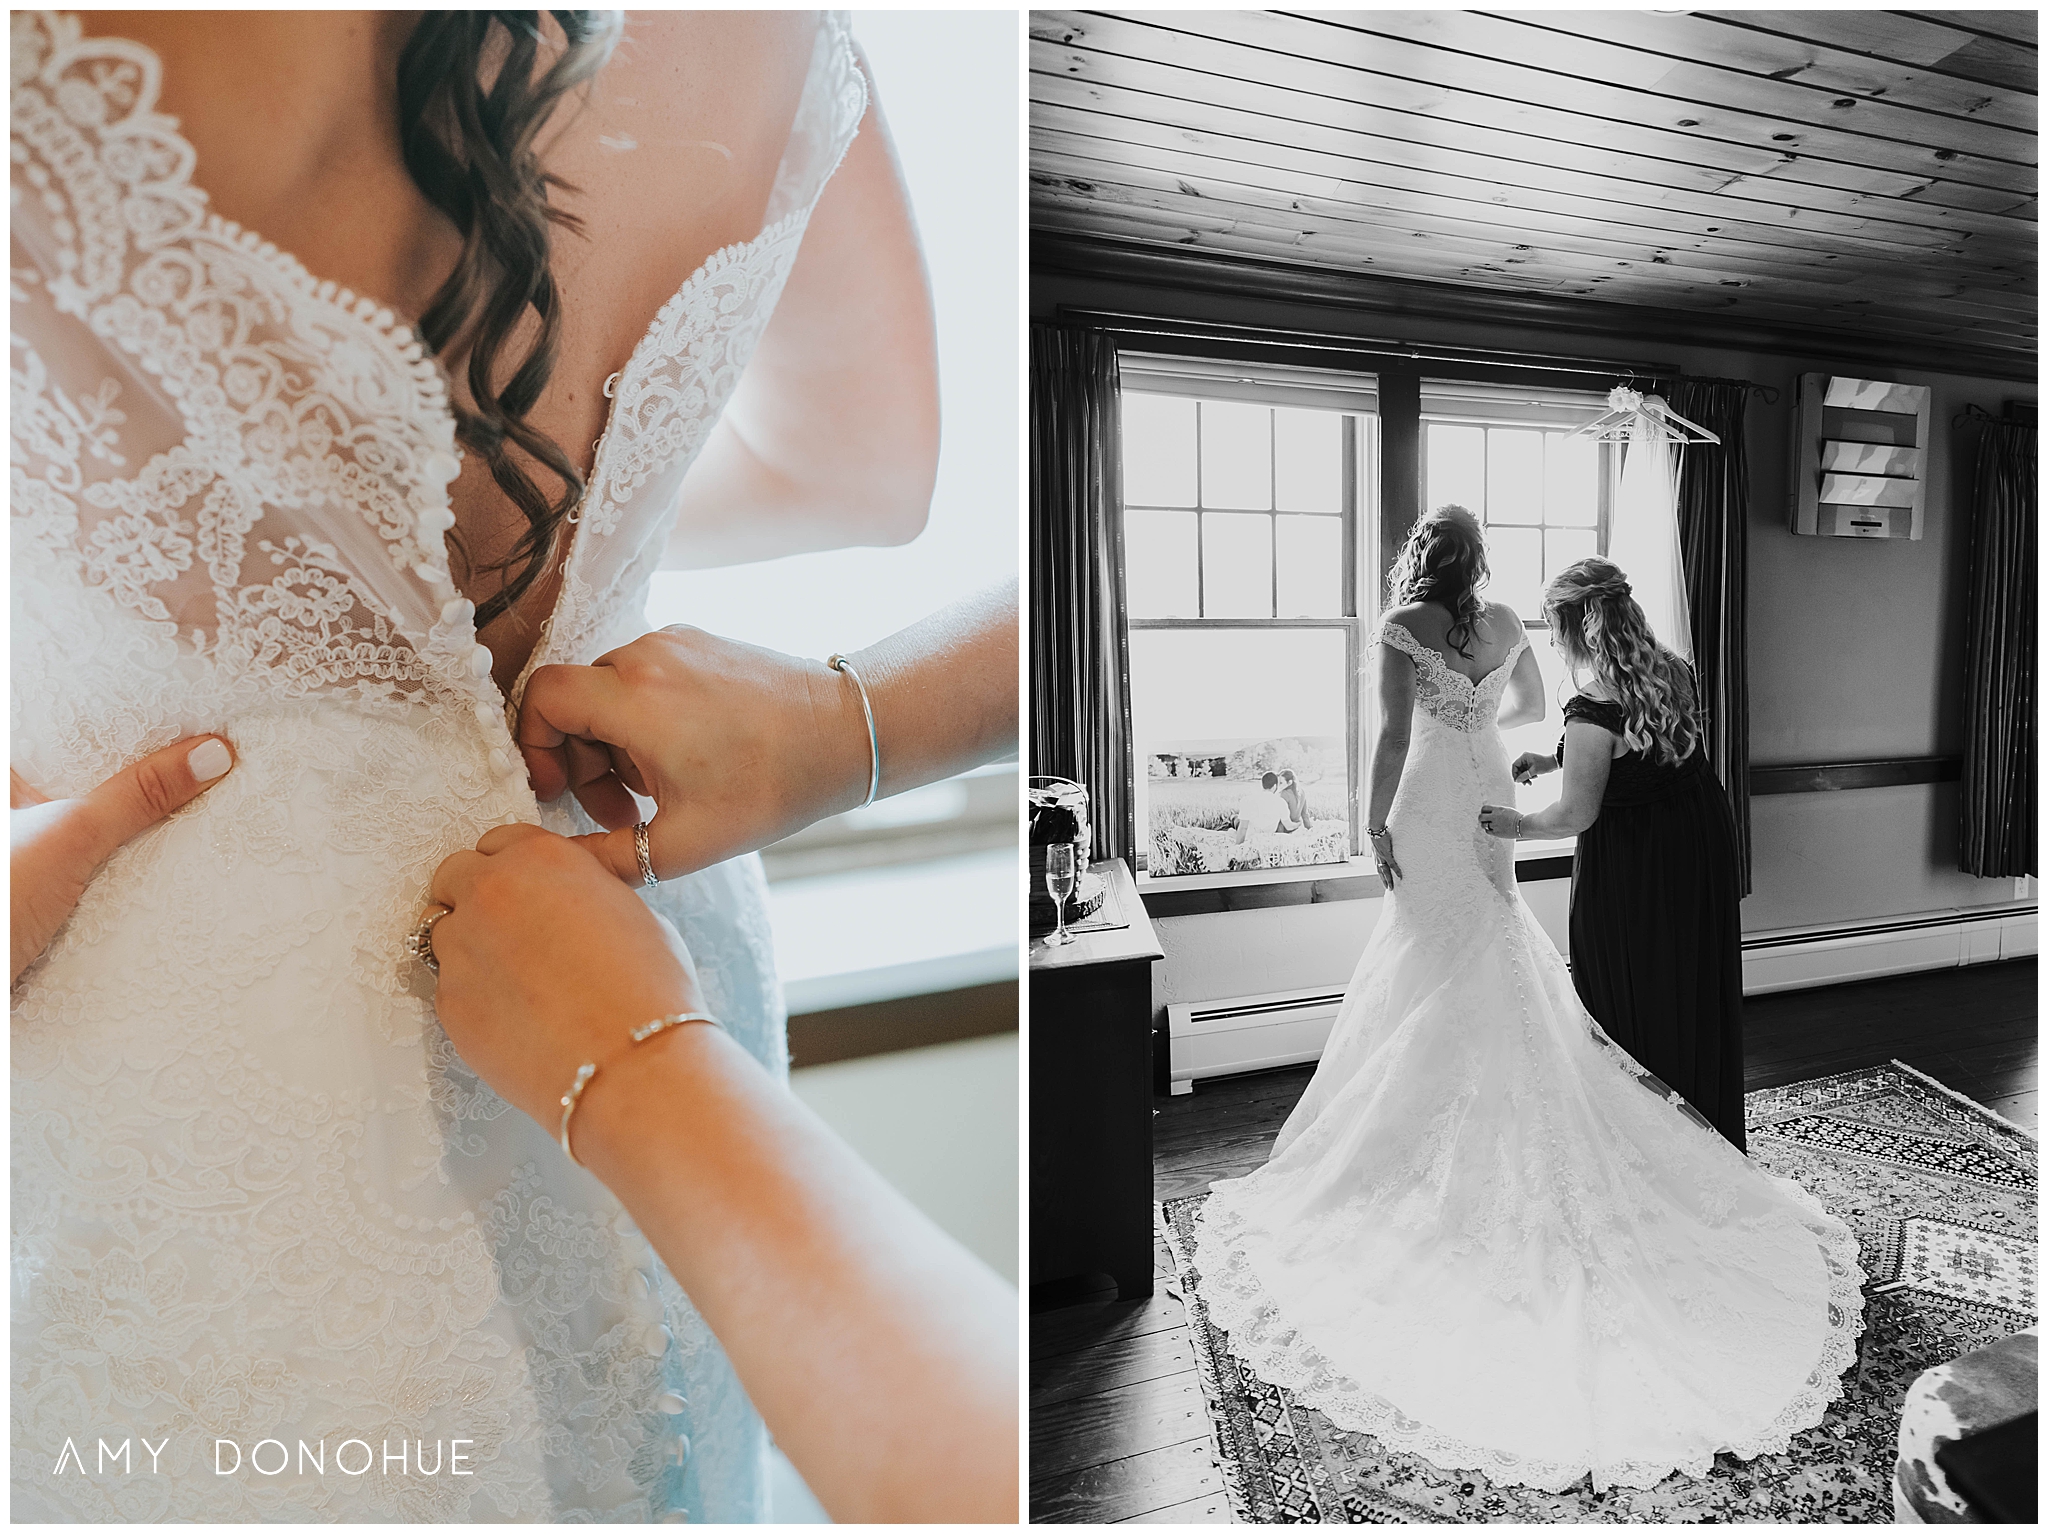 Getting into the dress | Vermont Wedding Photographer | Mountain Top Inn Vermont | © Amy Donohue Photography